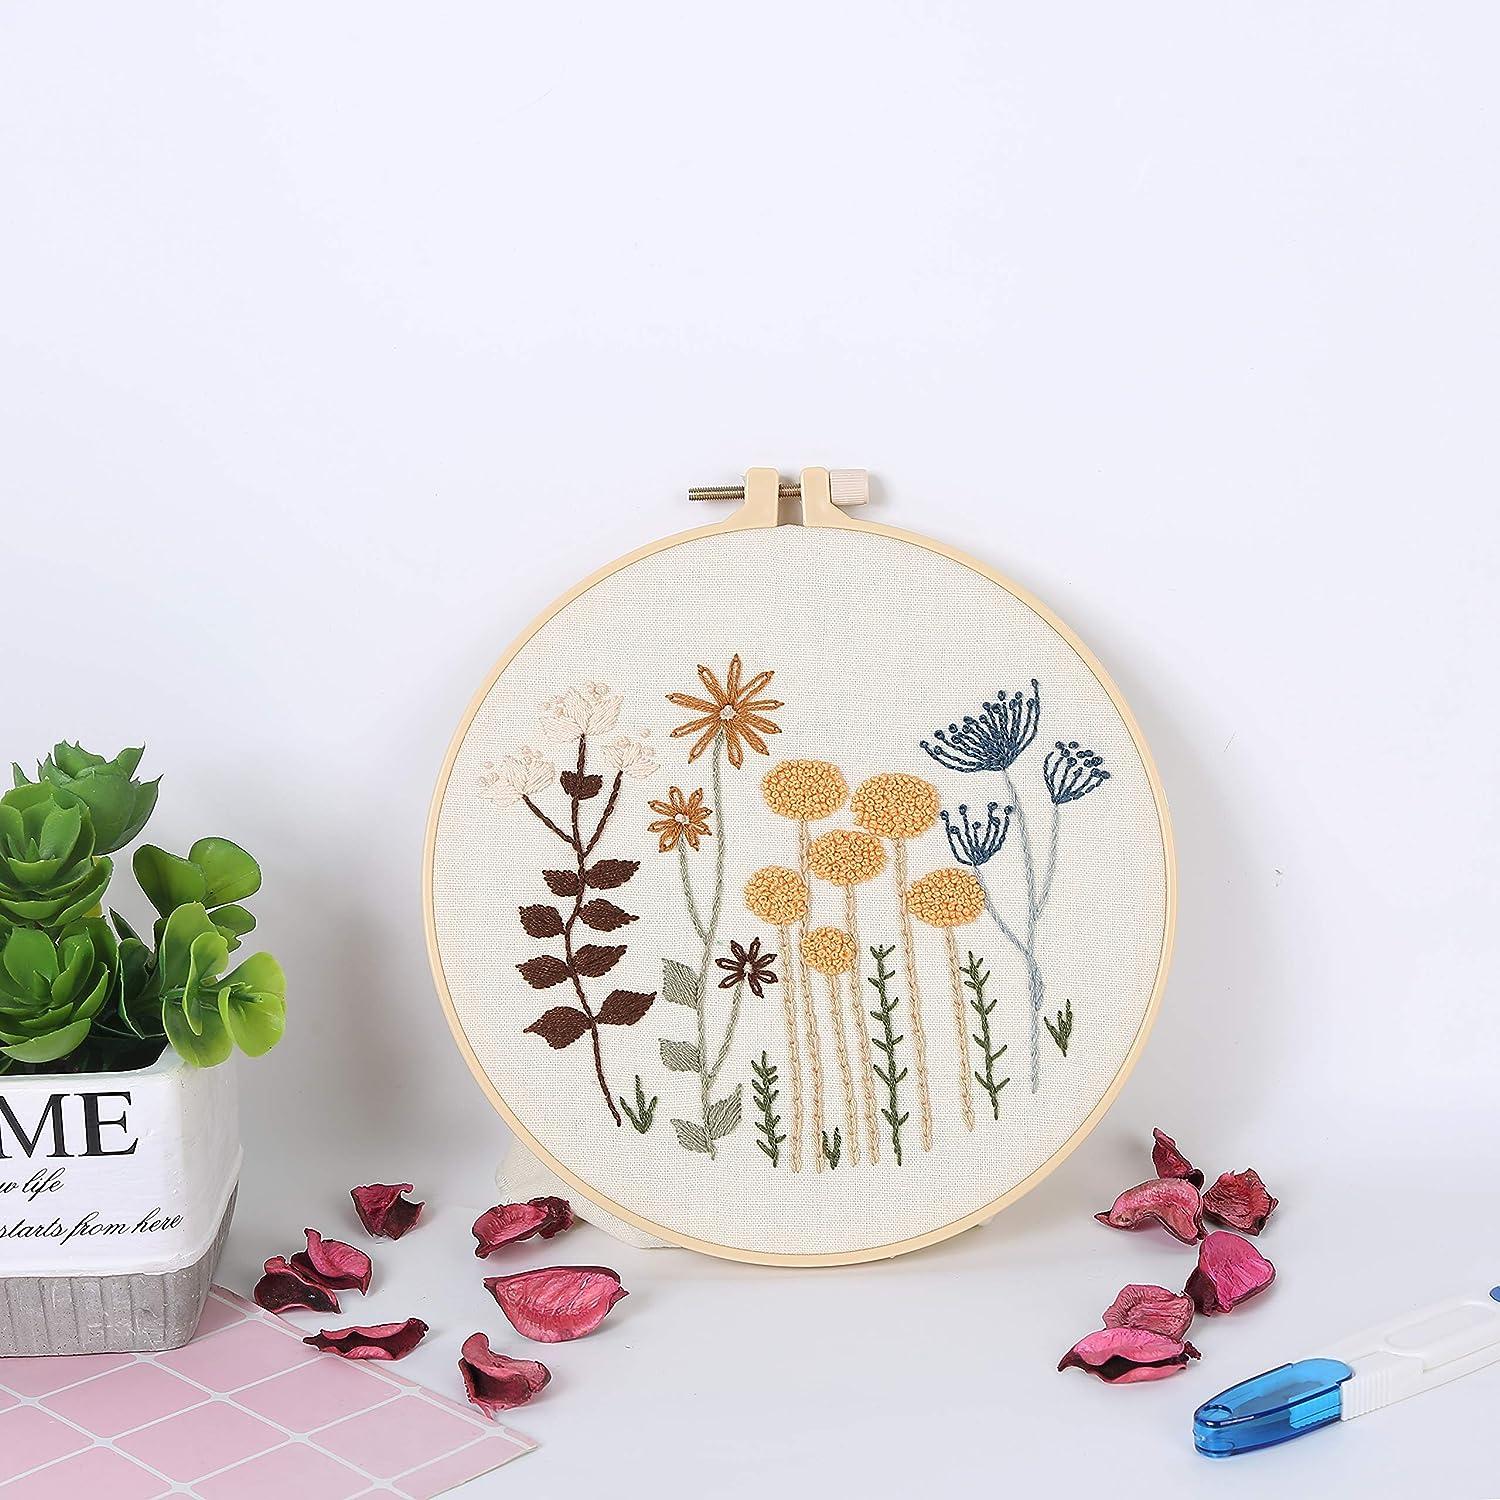 6 Pcs Embroidery Hoop 6 Size, round Plastic Cross Stitch Hoop